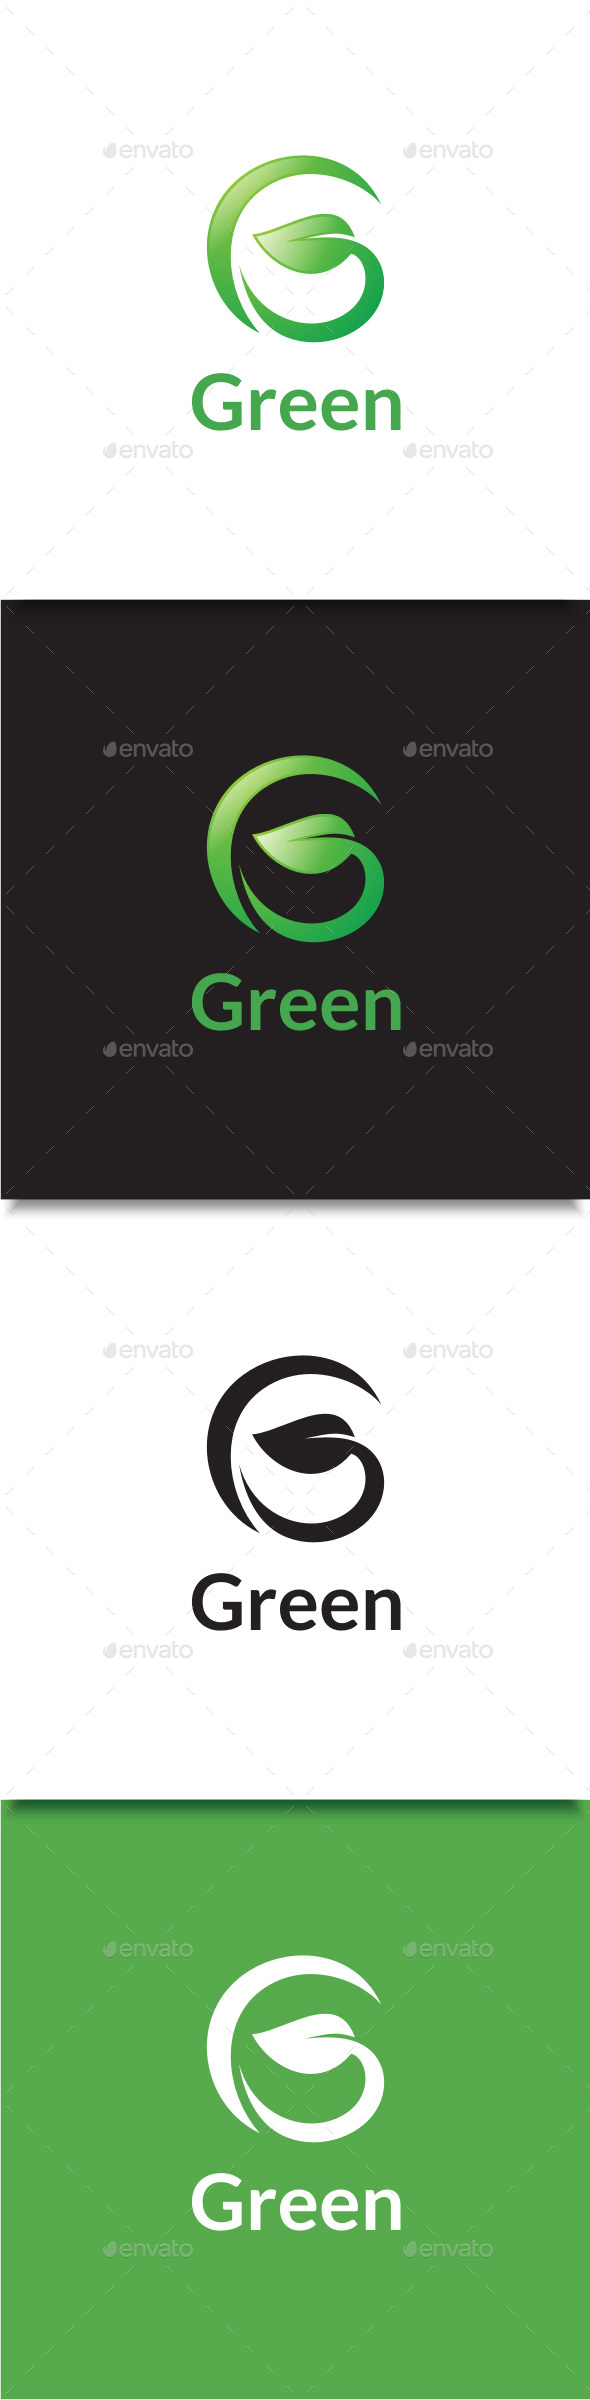 Green Sprout - Letter G Logo